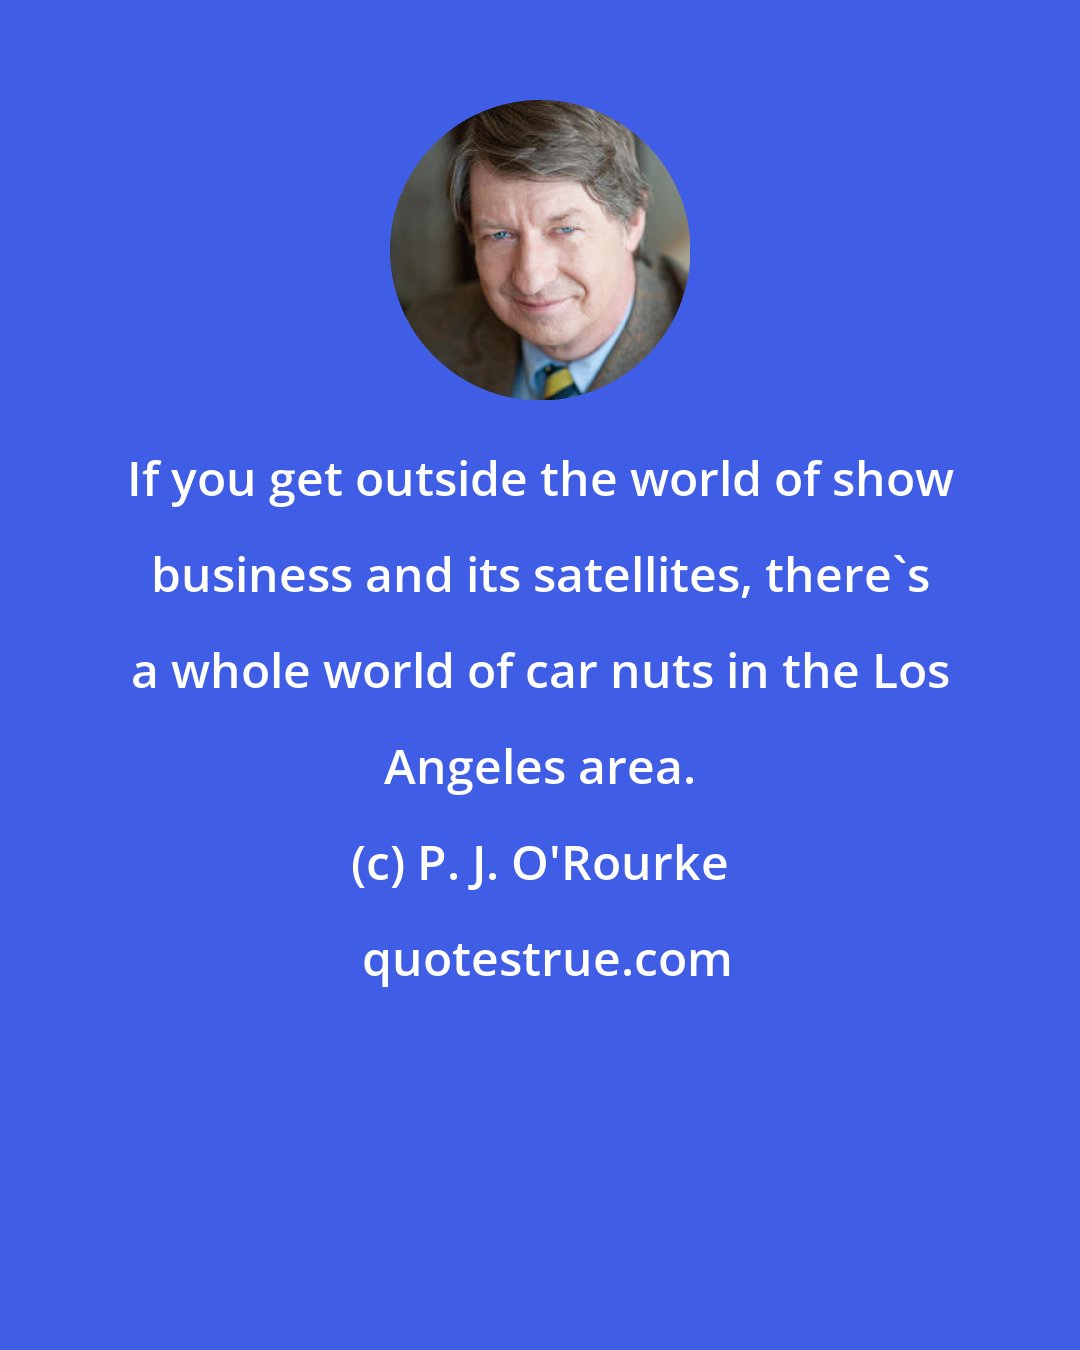 P. J. O'Rourke: If you get outside the world of show business and its satellites, there's a whole world of car nuts in the Los Angeles area.